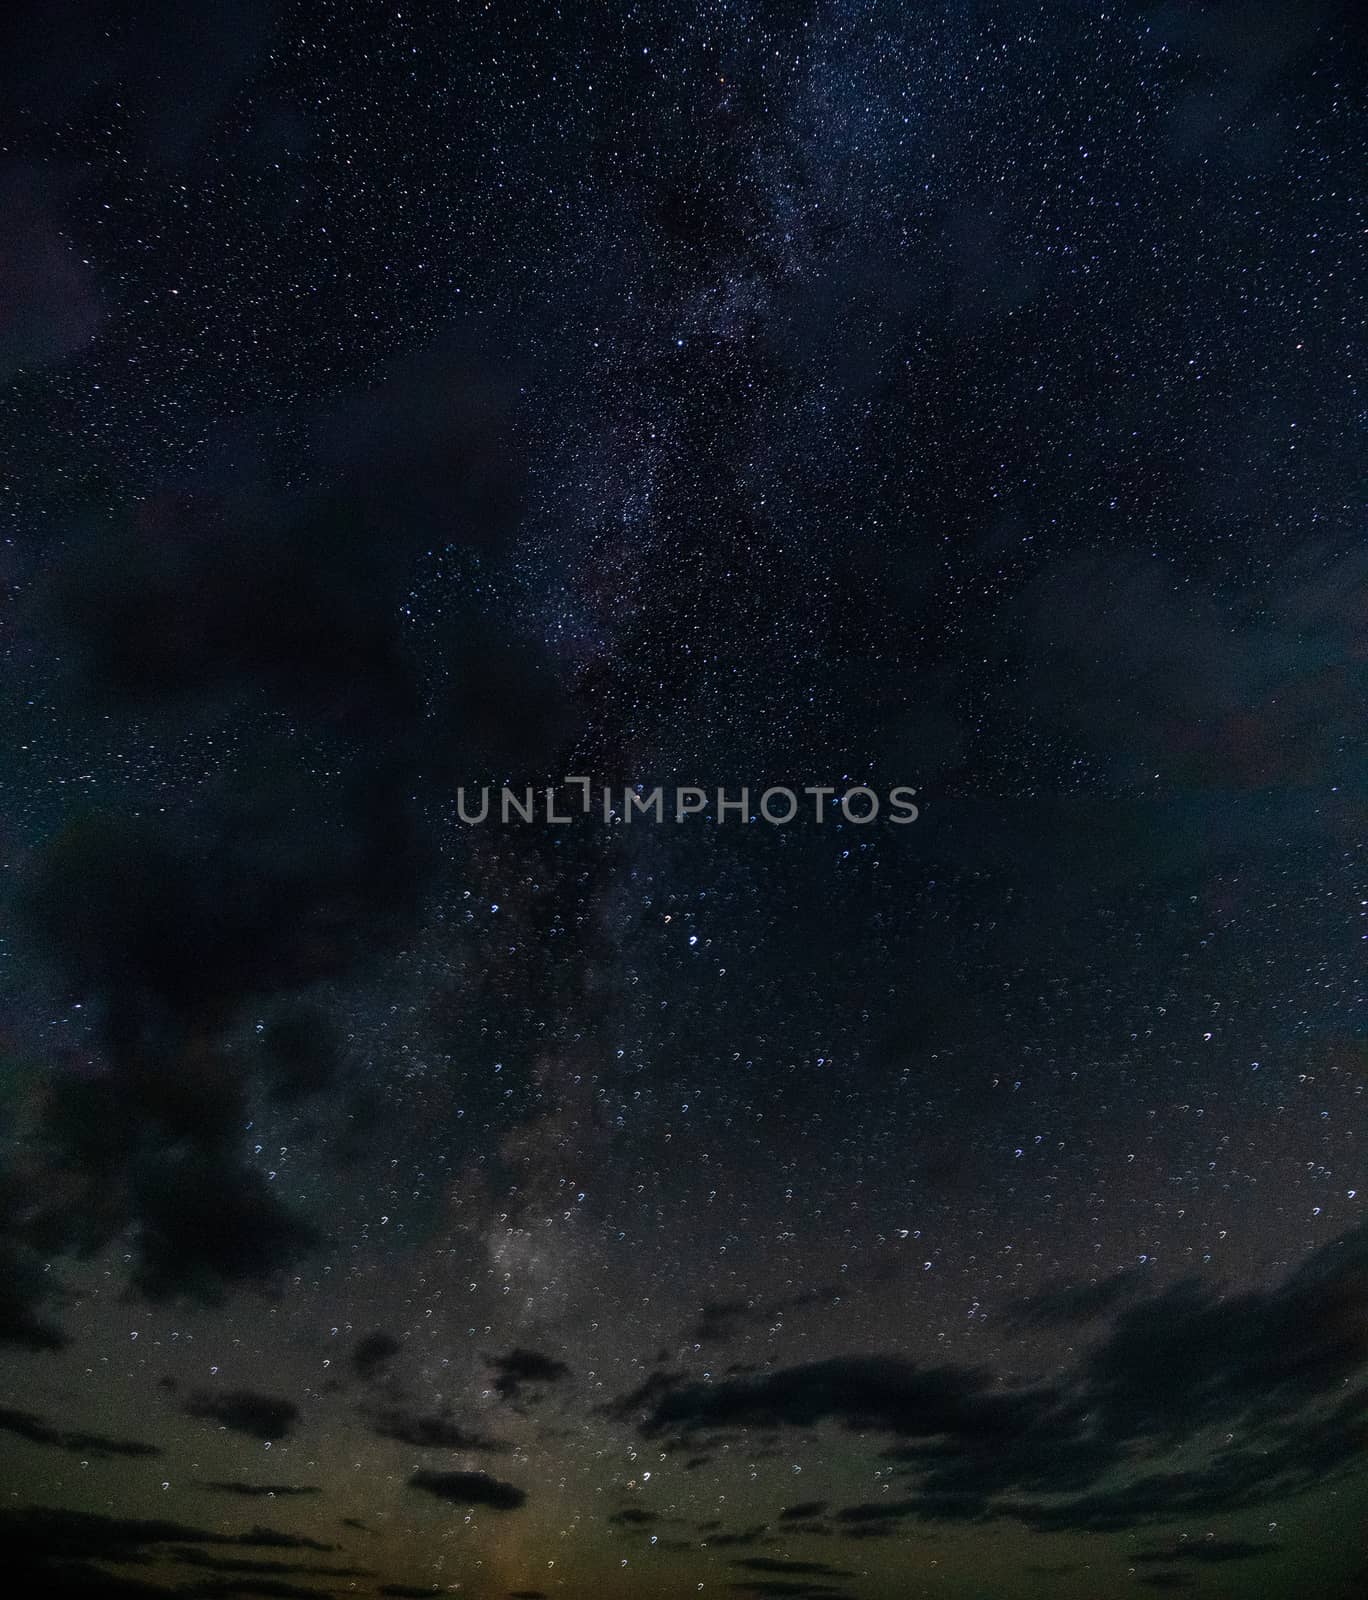 The starry sky above the Altai mountains. Beautiful night sky over the Altai mountains.